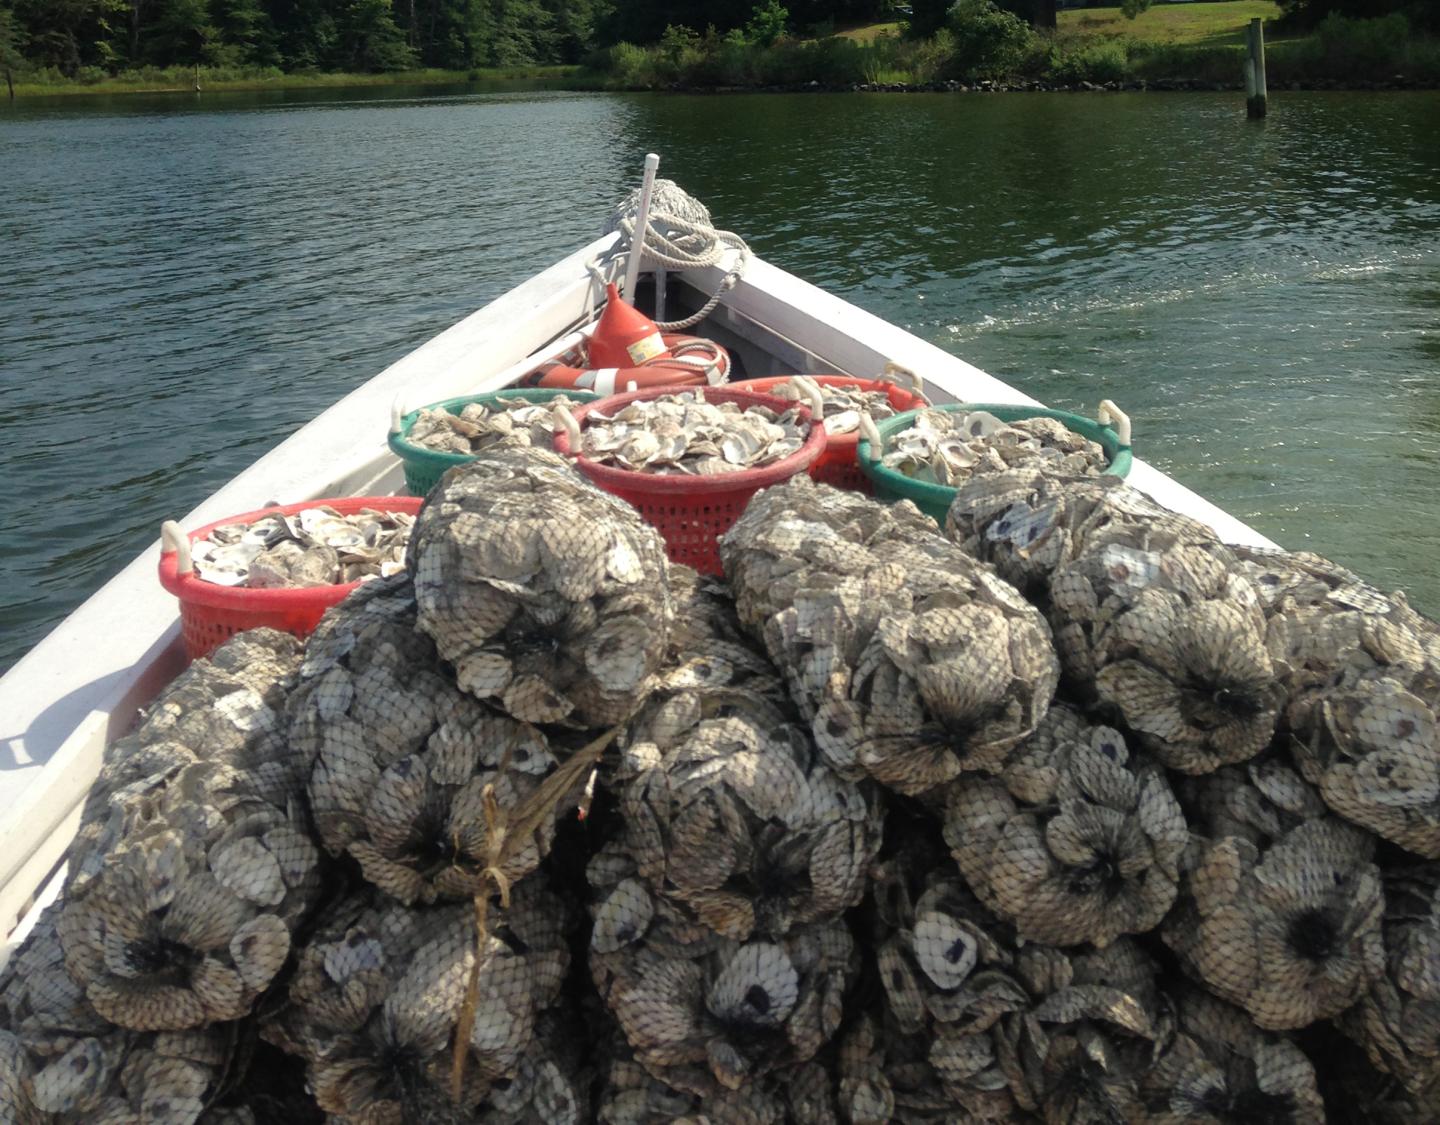 Oyster shells transported on a boat